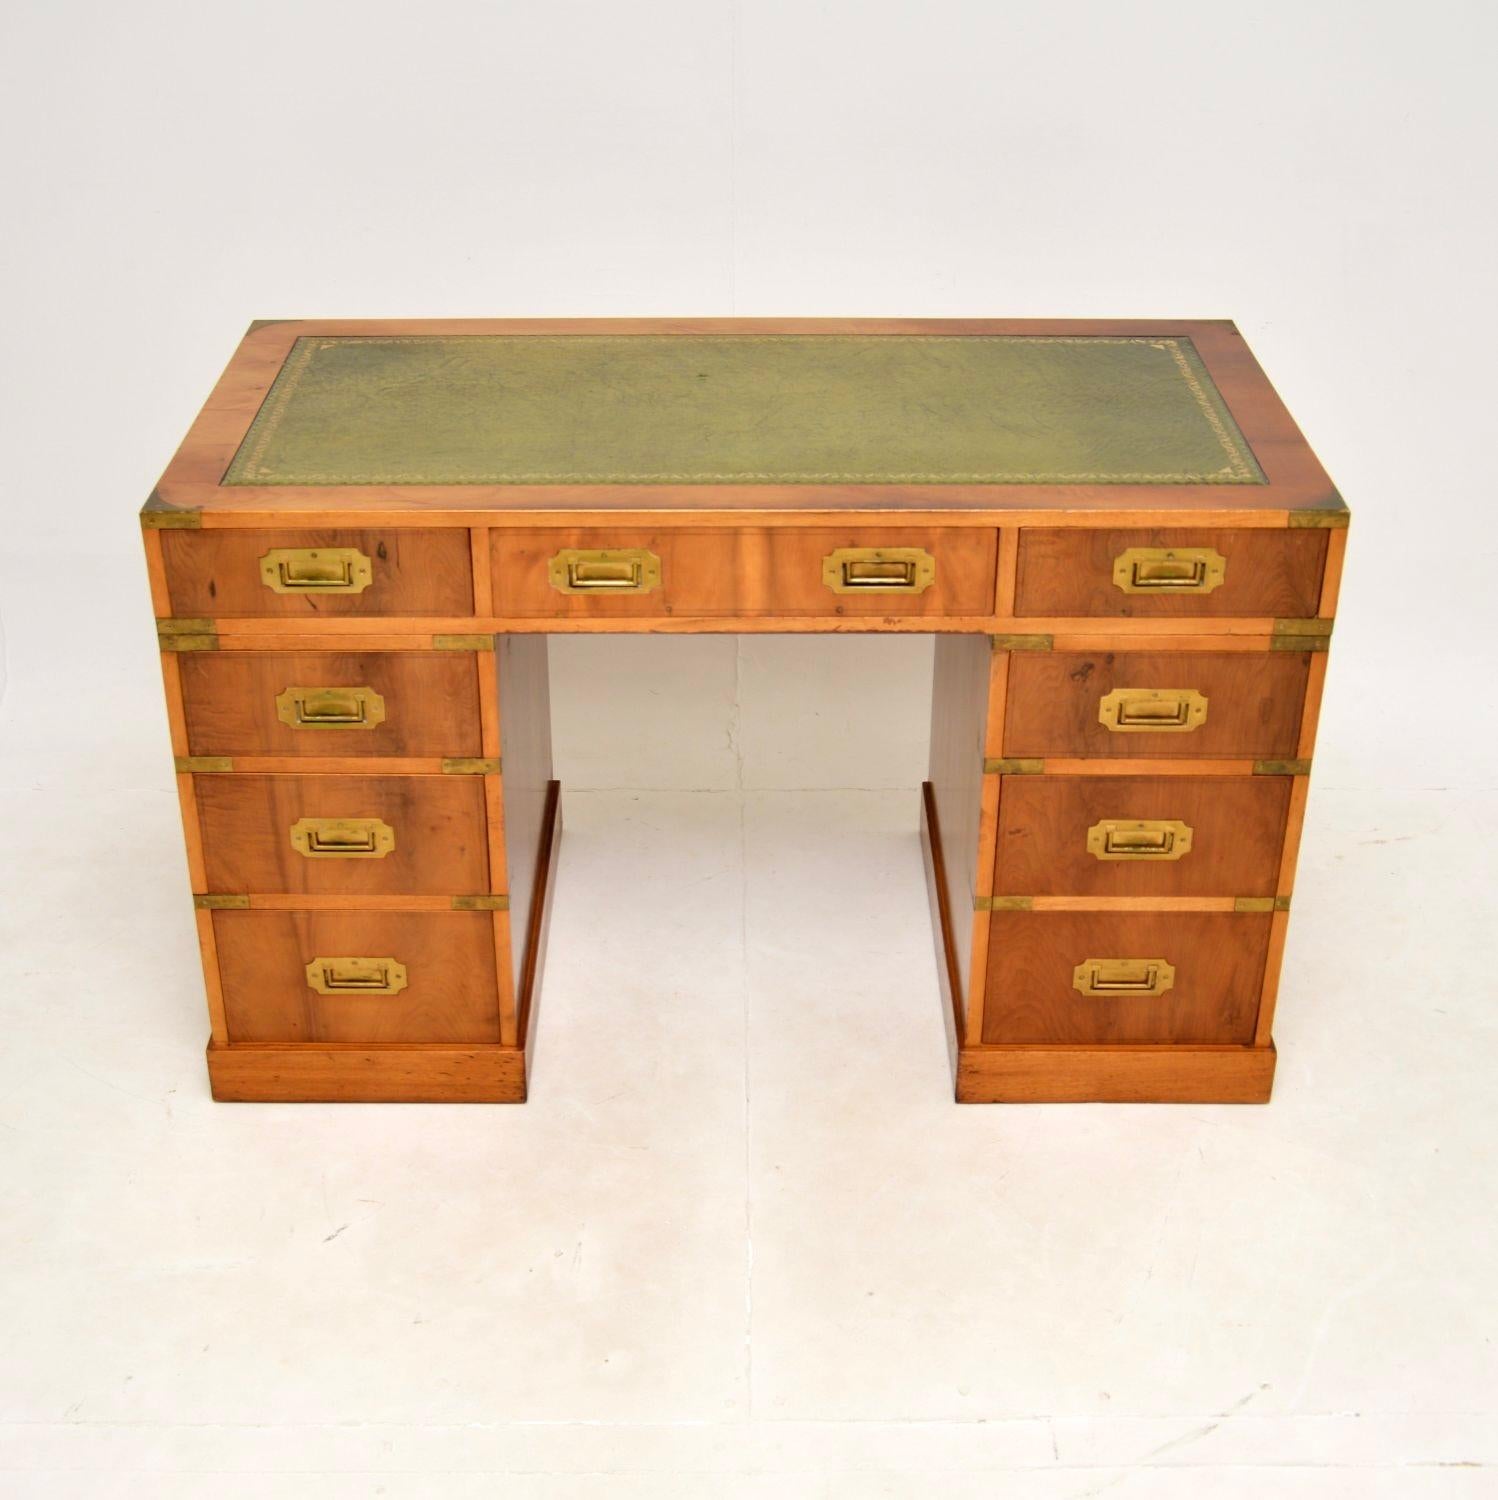 A top quality antique yew wood military campaign style pedestal desk. This was made in England, it dates from around the 1950’s.

It is very well made, with a useful and smart design. The yew wood has a lovely colour tone, there is high quality